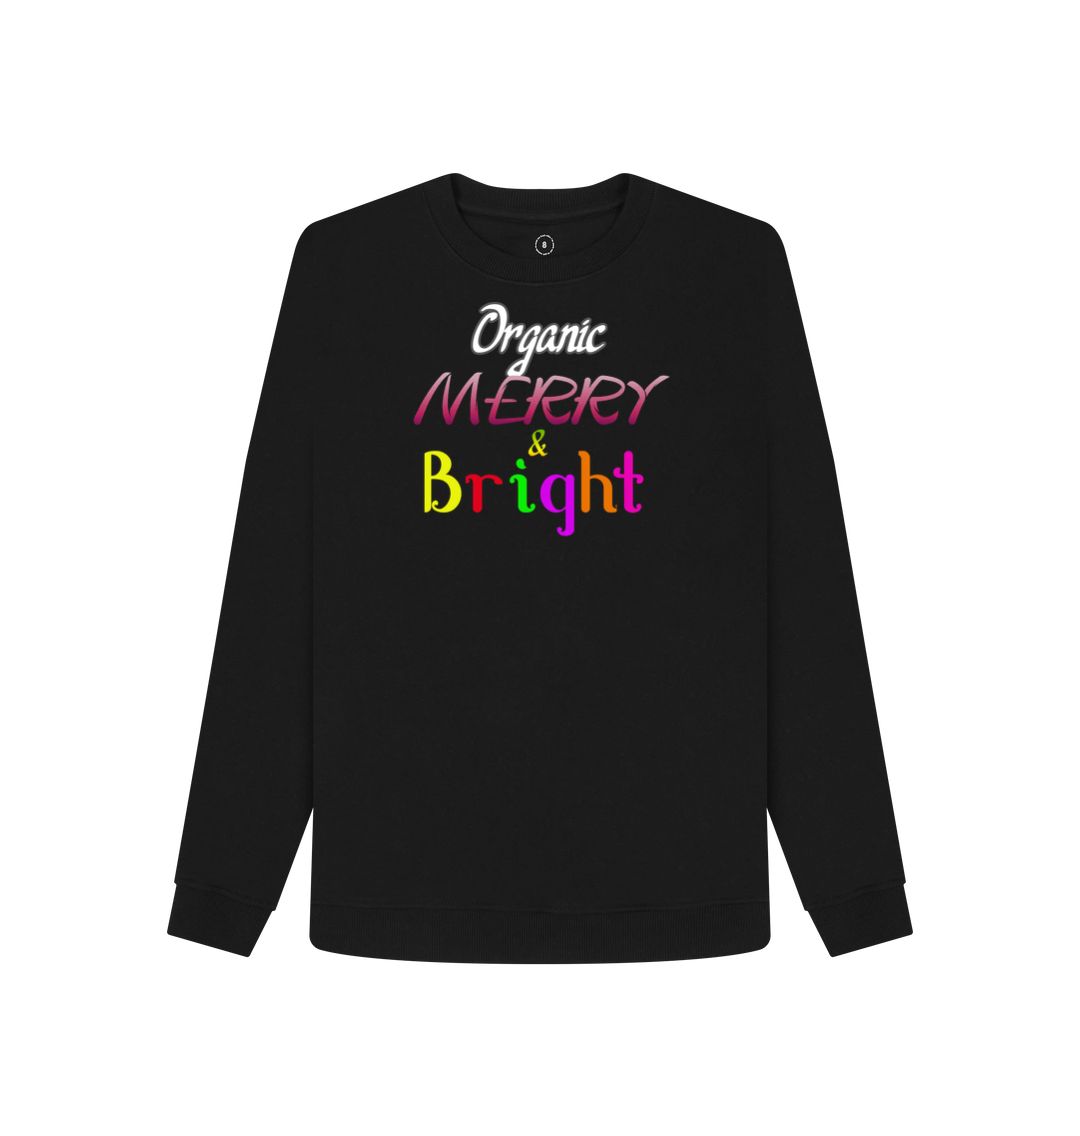 Black Organic Merry & Bright Women's Christmas Remill® Sweater - women's sweater at TFC&H Co.